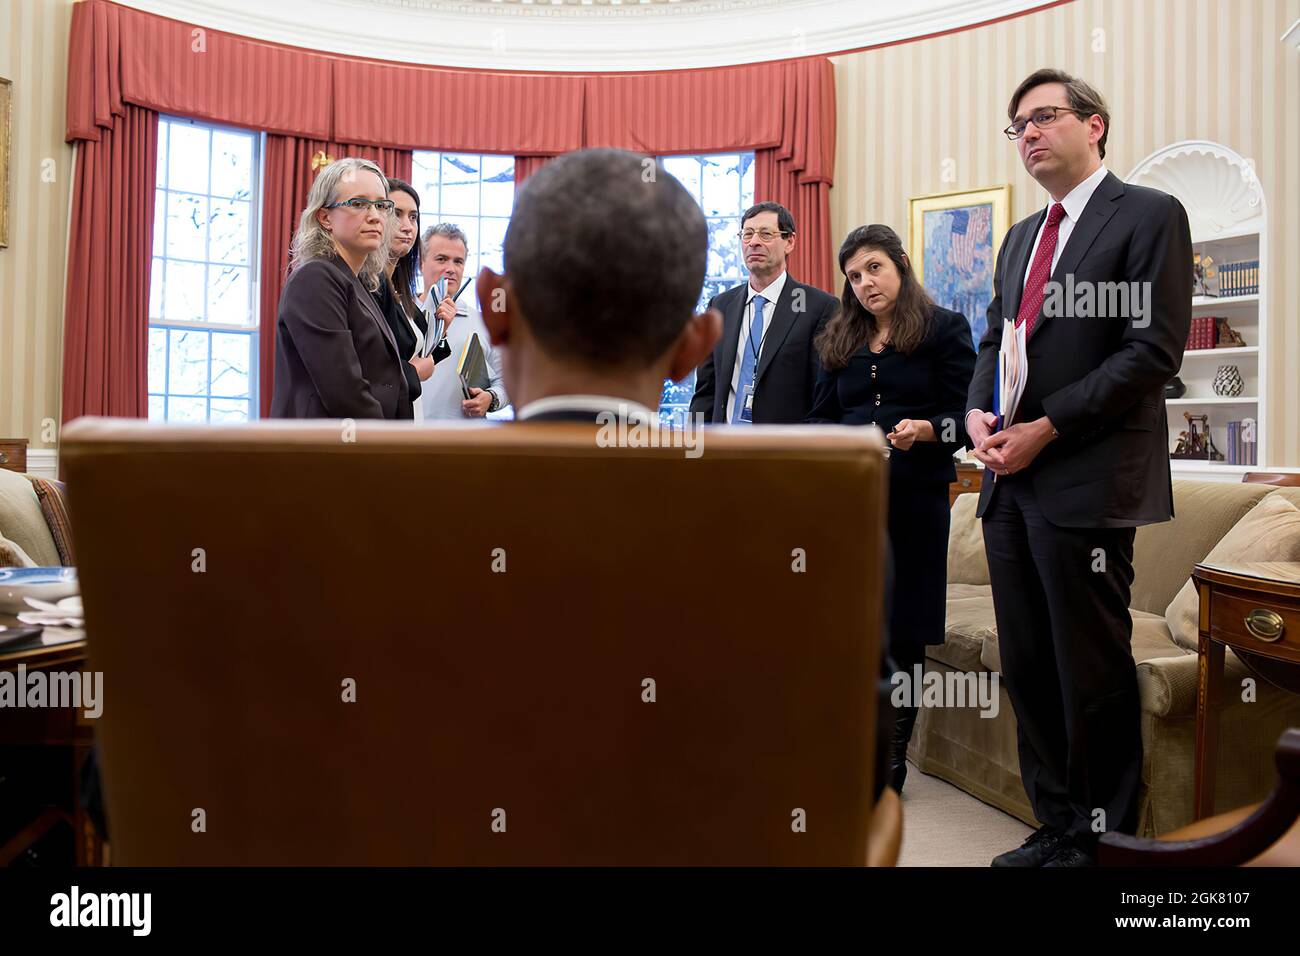 President Barack Obama talks with participants following a Council of Economic Advisers meeting in the Oval Office, March 5, 2015. Standing from left are: Abigail Wozniak, CEA Senior Economist; Jessica Schumer, CEA Chief of Staff and General Counsel; National Economic Council Director Jeffrey Zients; CEA Member Maurice Obstfeld; CEA Member Betsey Stevenson and CEA Chair Jason Furman. (Official White House Photo by Pete Souza) This official White House photograph is being made available only for publication by news organizations and/or for personal use printing by the subject(s) of the photogra Stock Photo